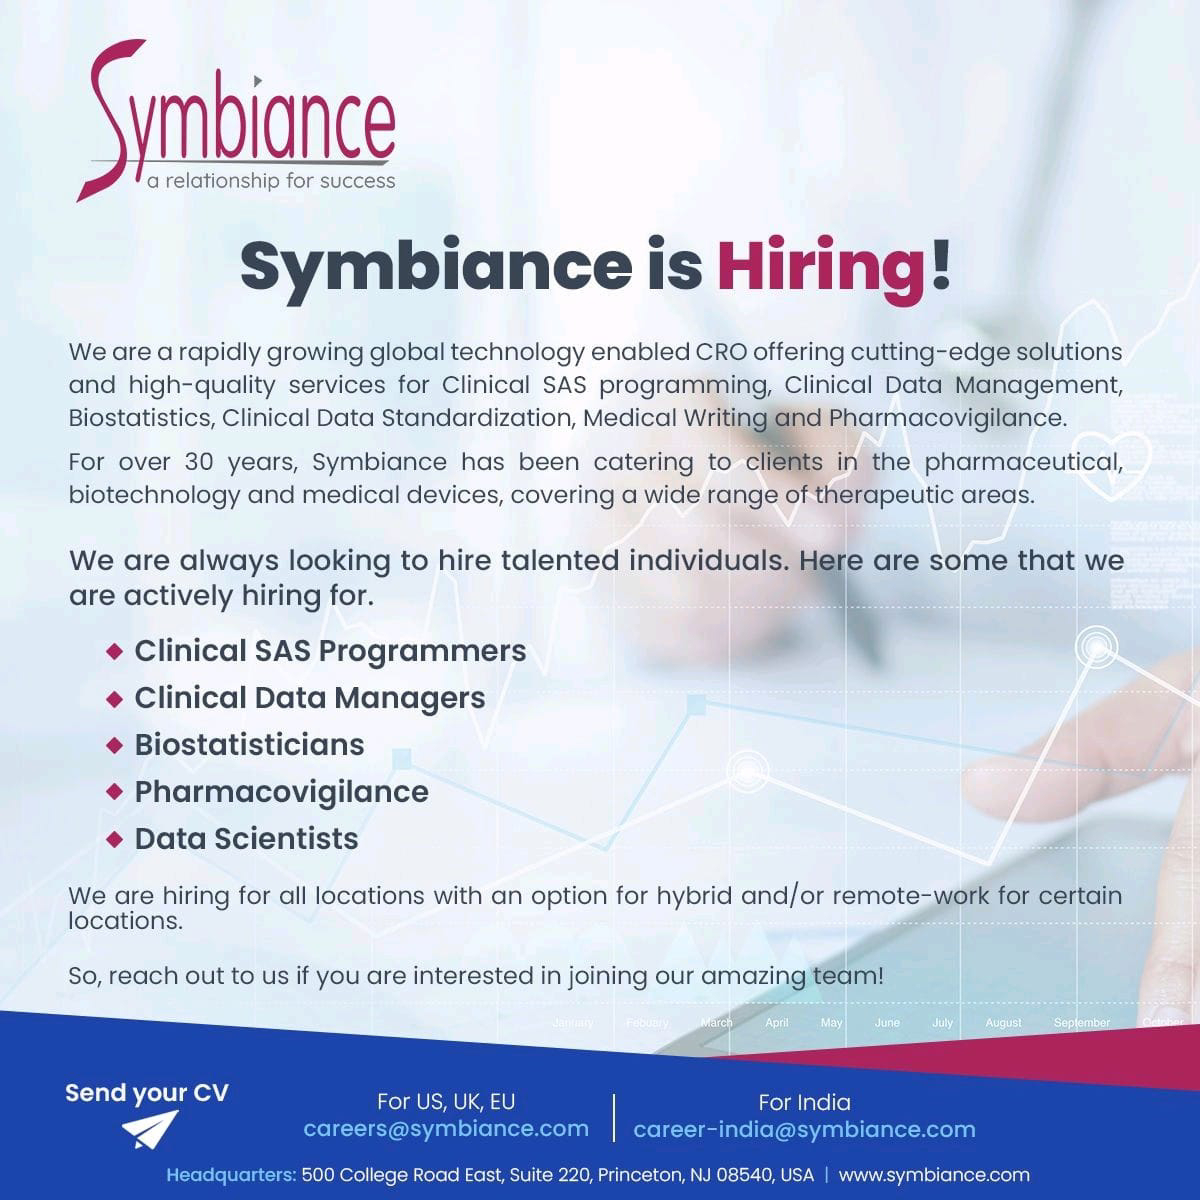 Job Available's for Symbiance Job Vacancy for Clinical SAS Programmers/ Clinical Data Managers/ Biostatisticians/ Pharmacovigilance/ Data Scientists